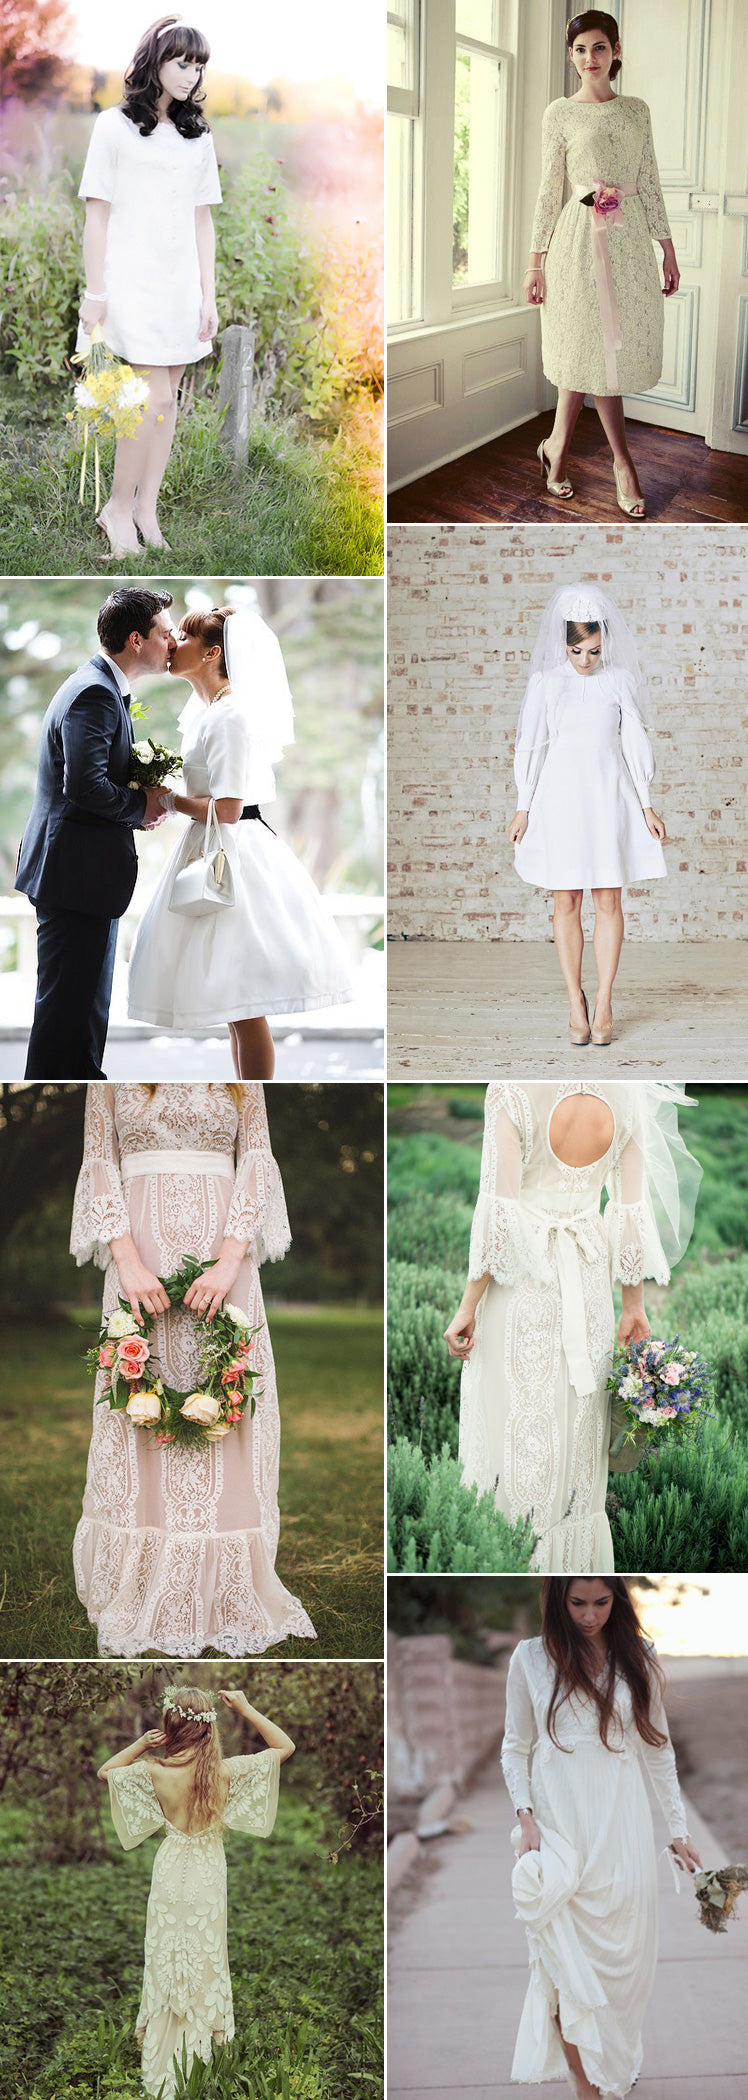 1960s and 1970s bridal dress ideas